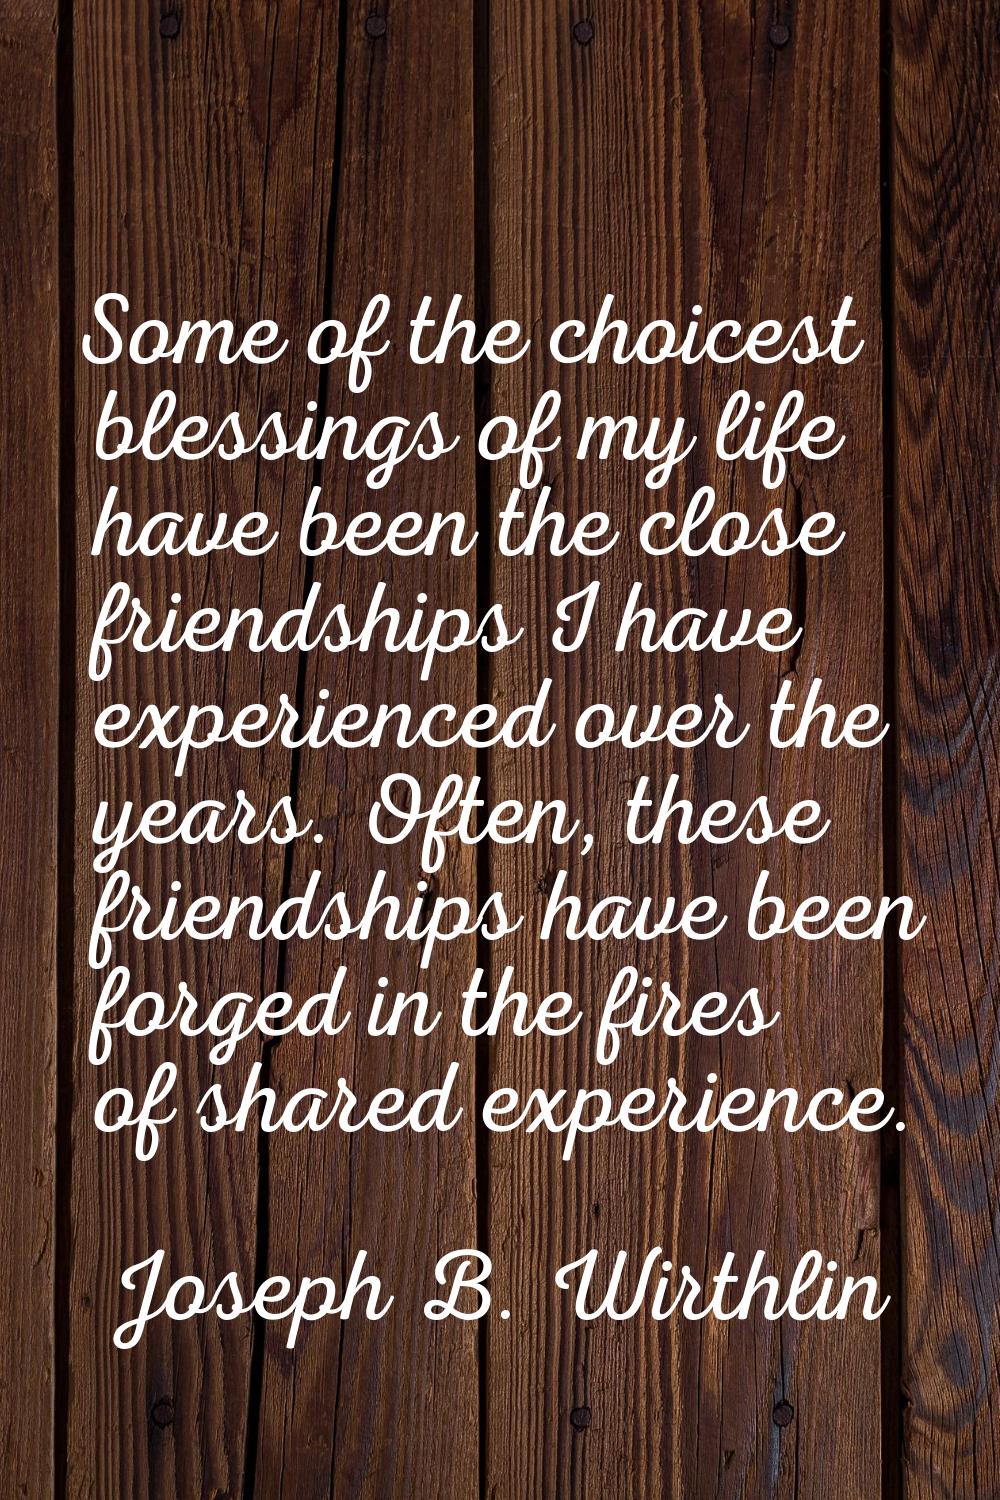 Some of the choicest blessings of my life have been the close friendships I have experienced over t